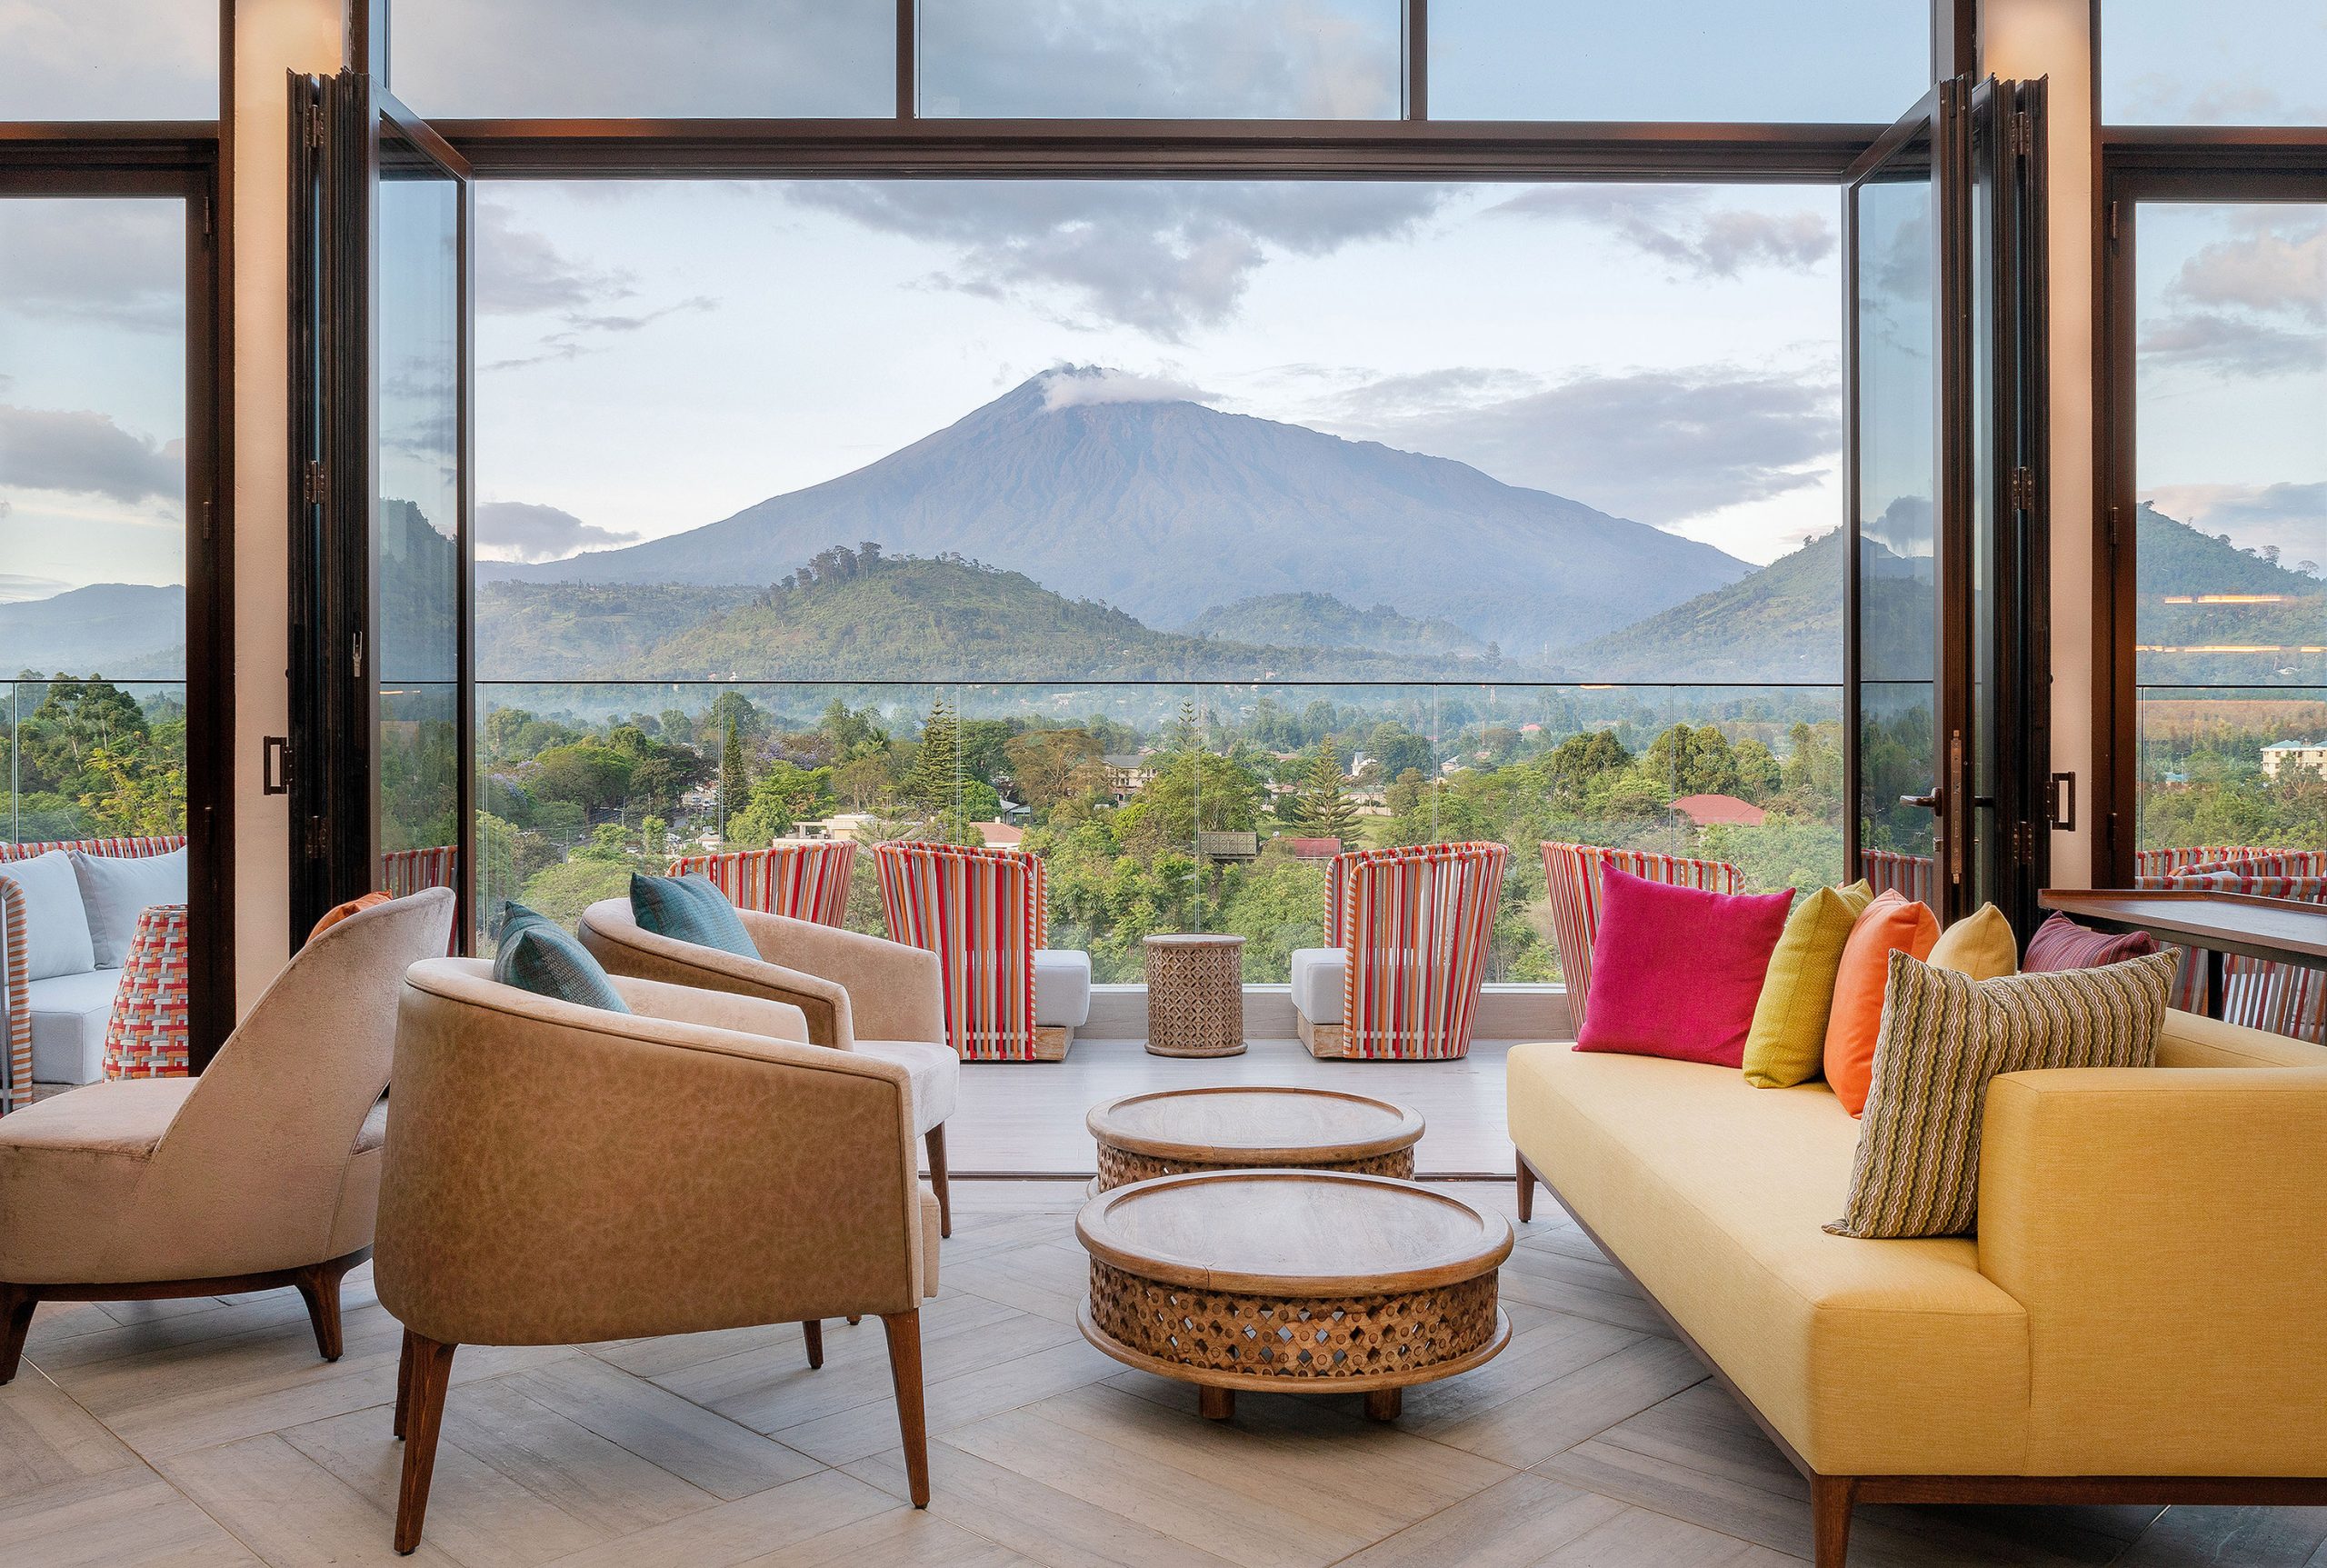 The view of Mount Meru from Gran Meliá Arusha